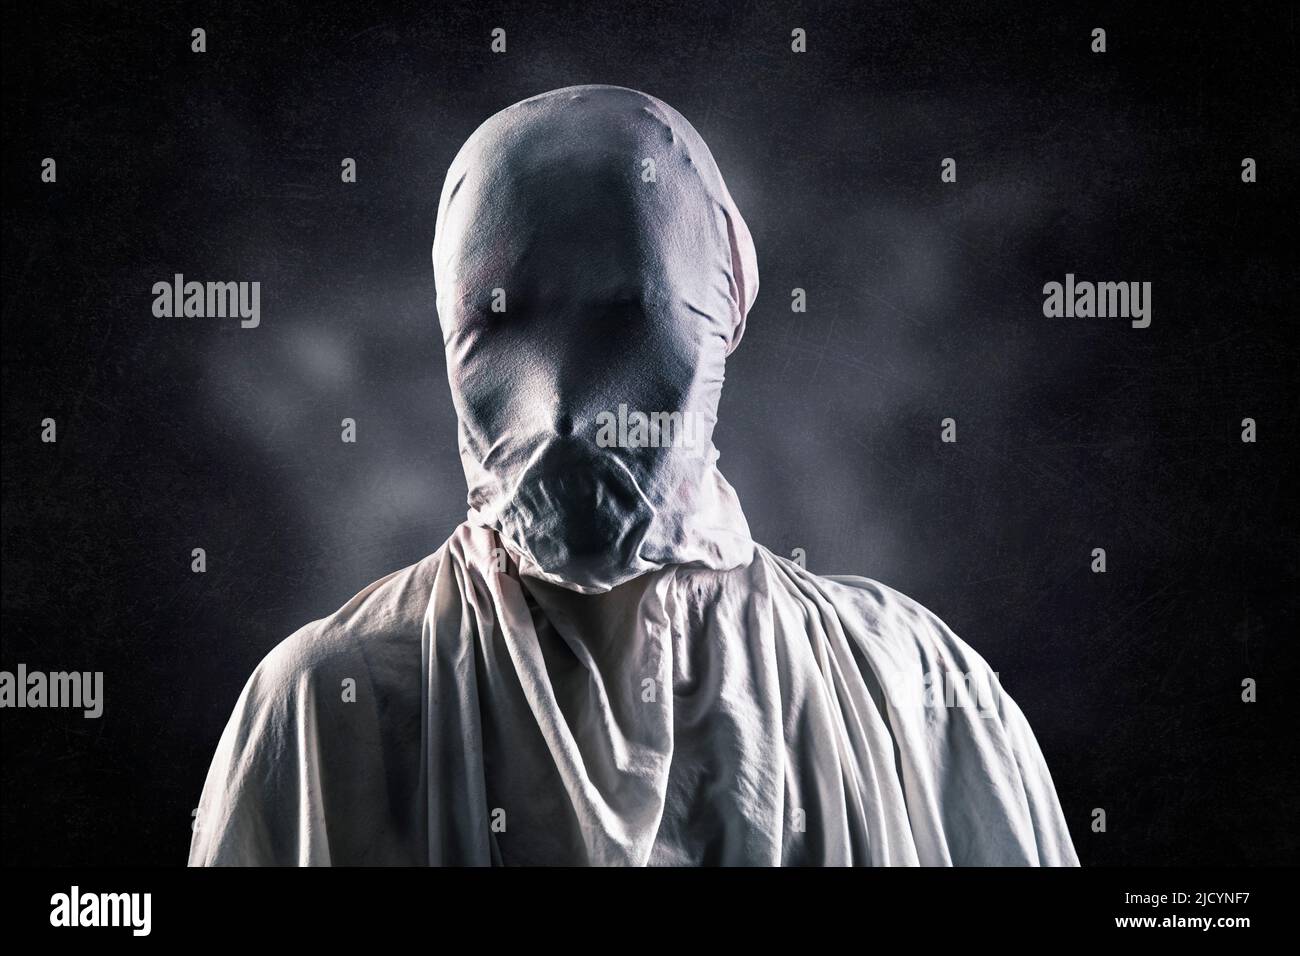 Portrait of a scary ghost over dark misty background Stock Photo